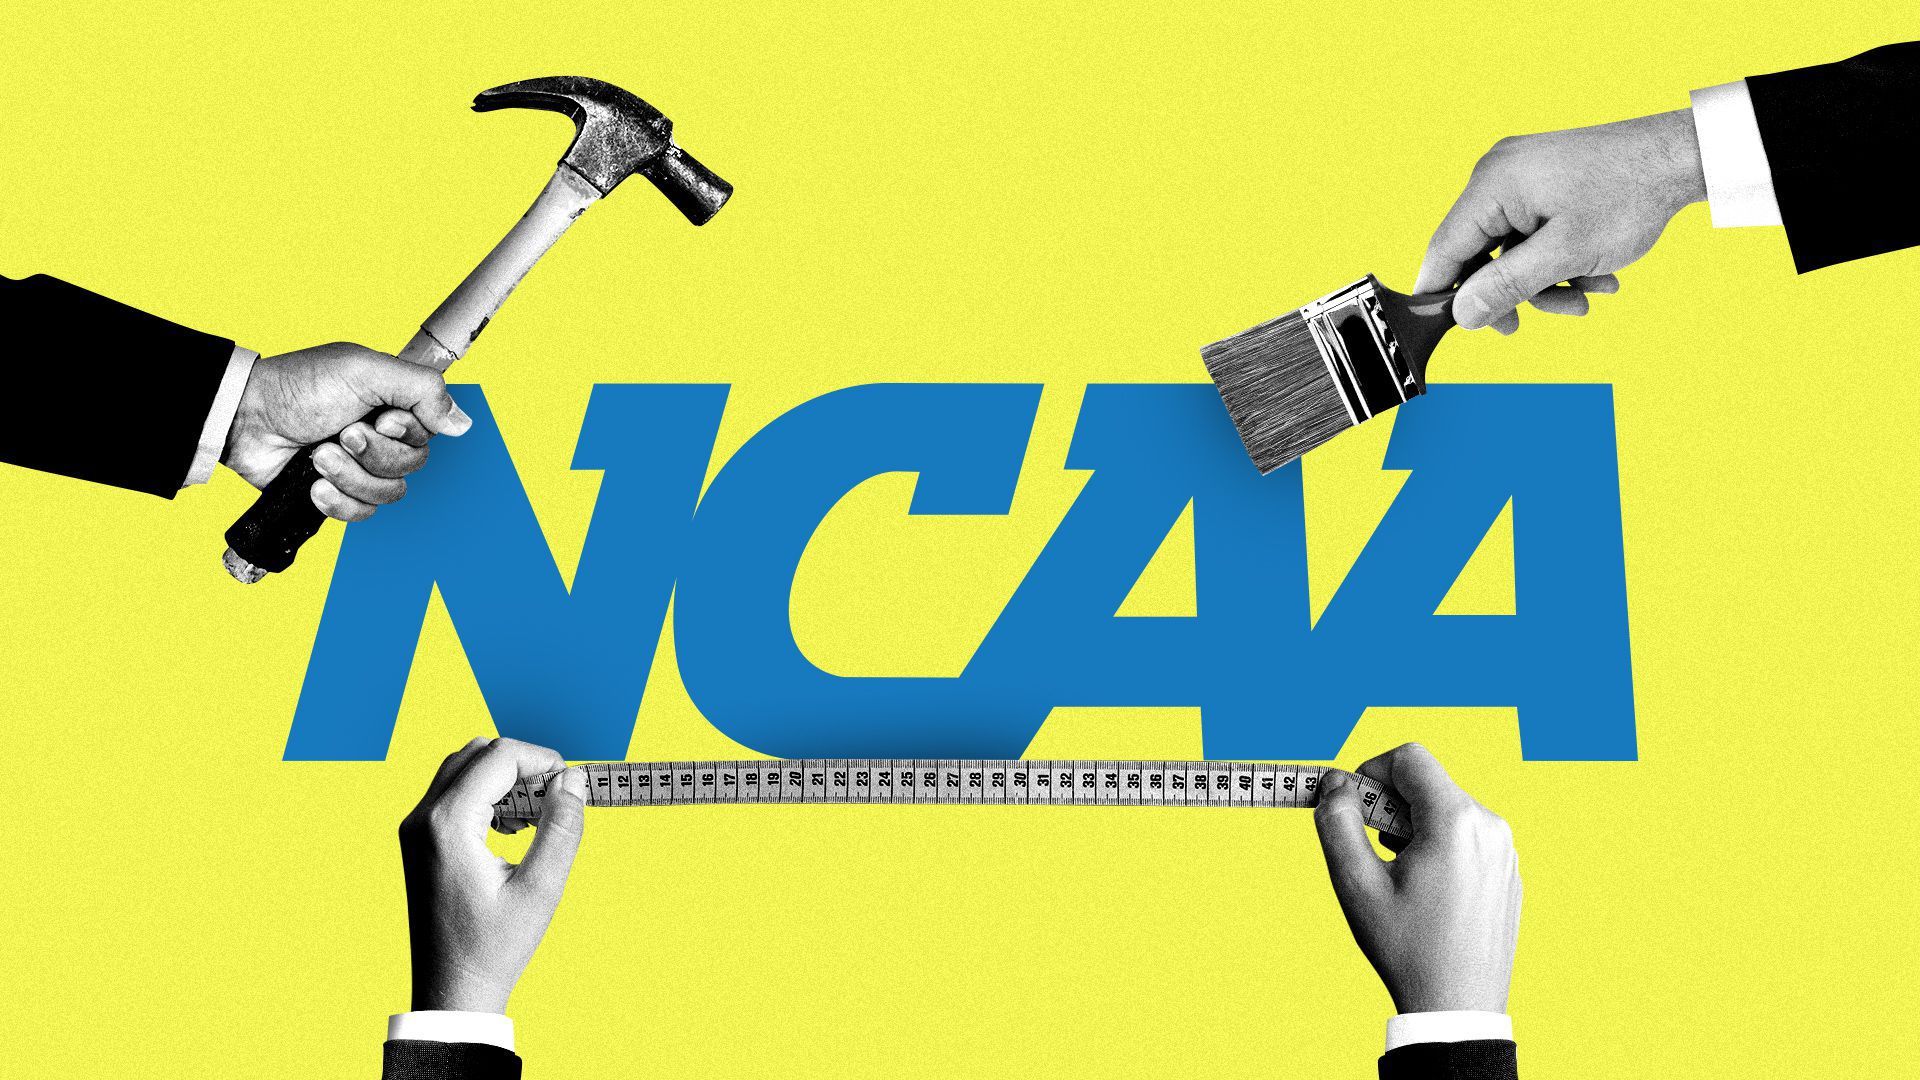 Illustration showing the NCAA logo with tools on it.